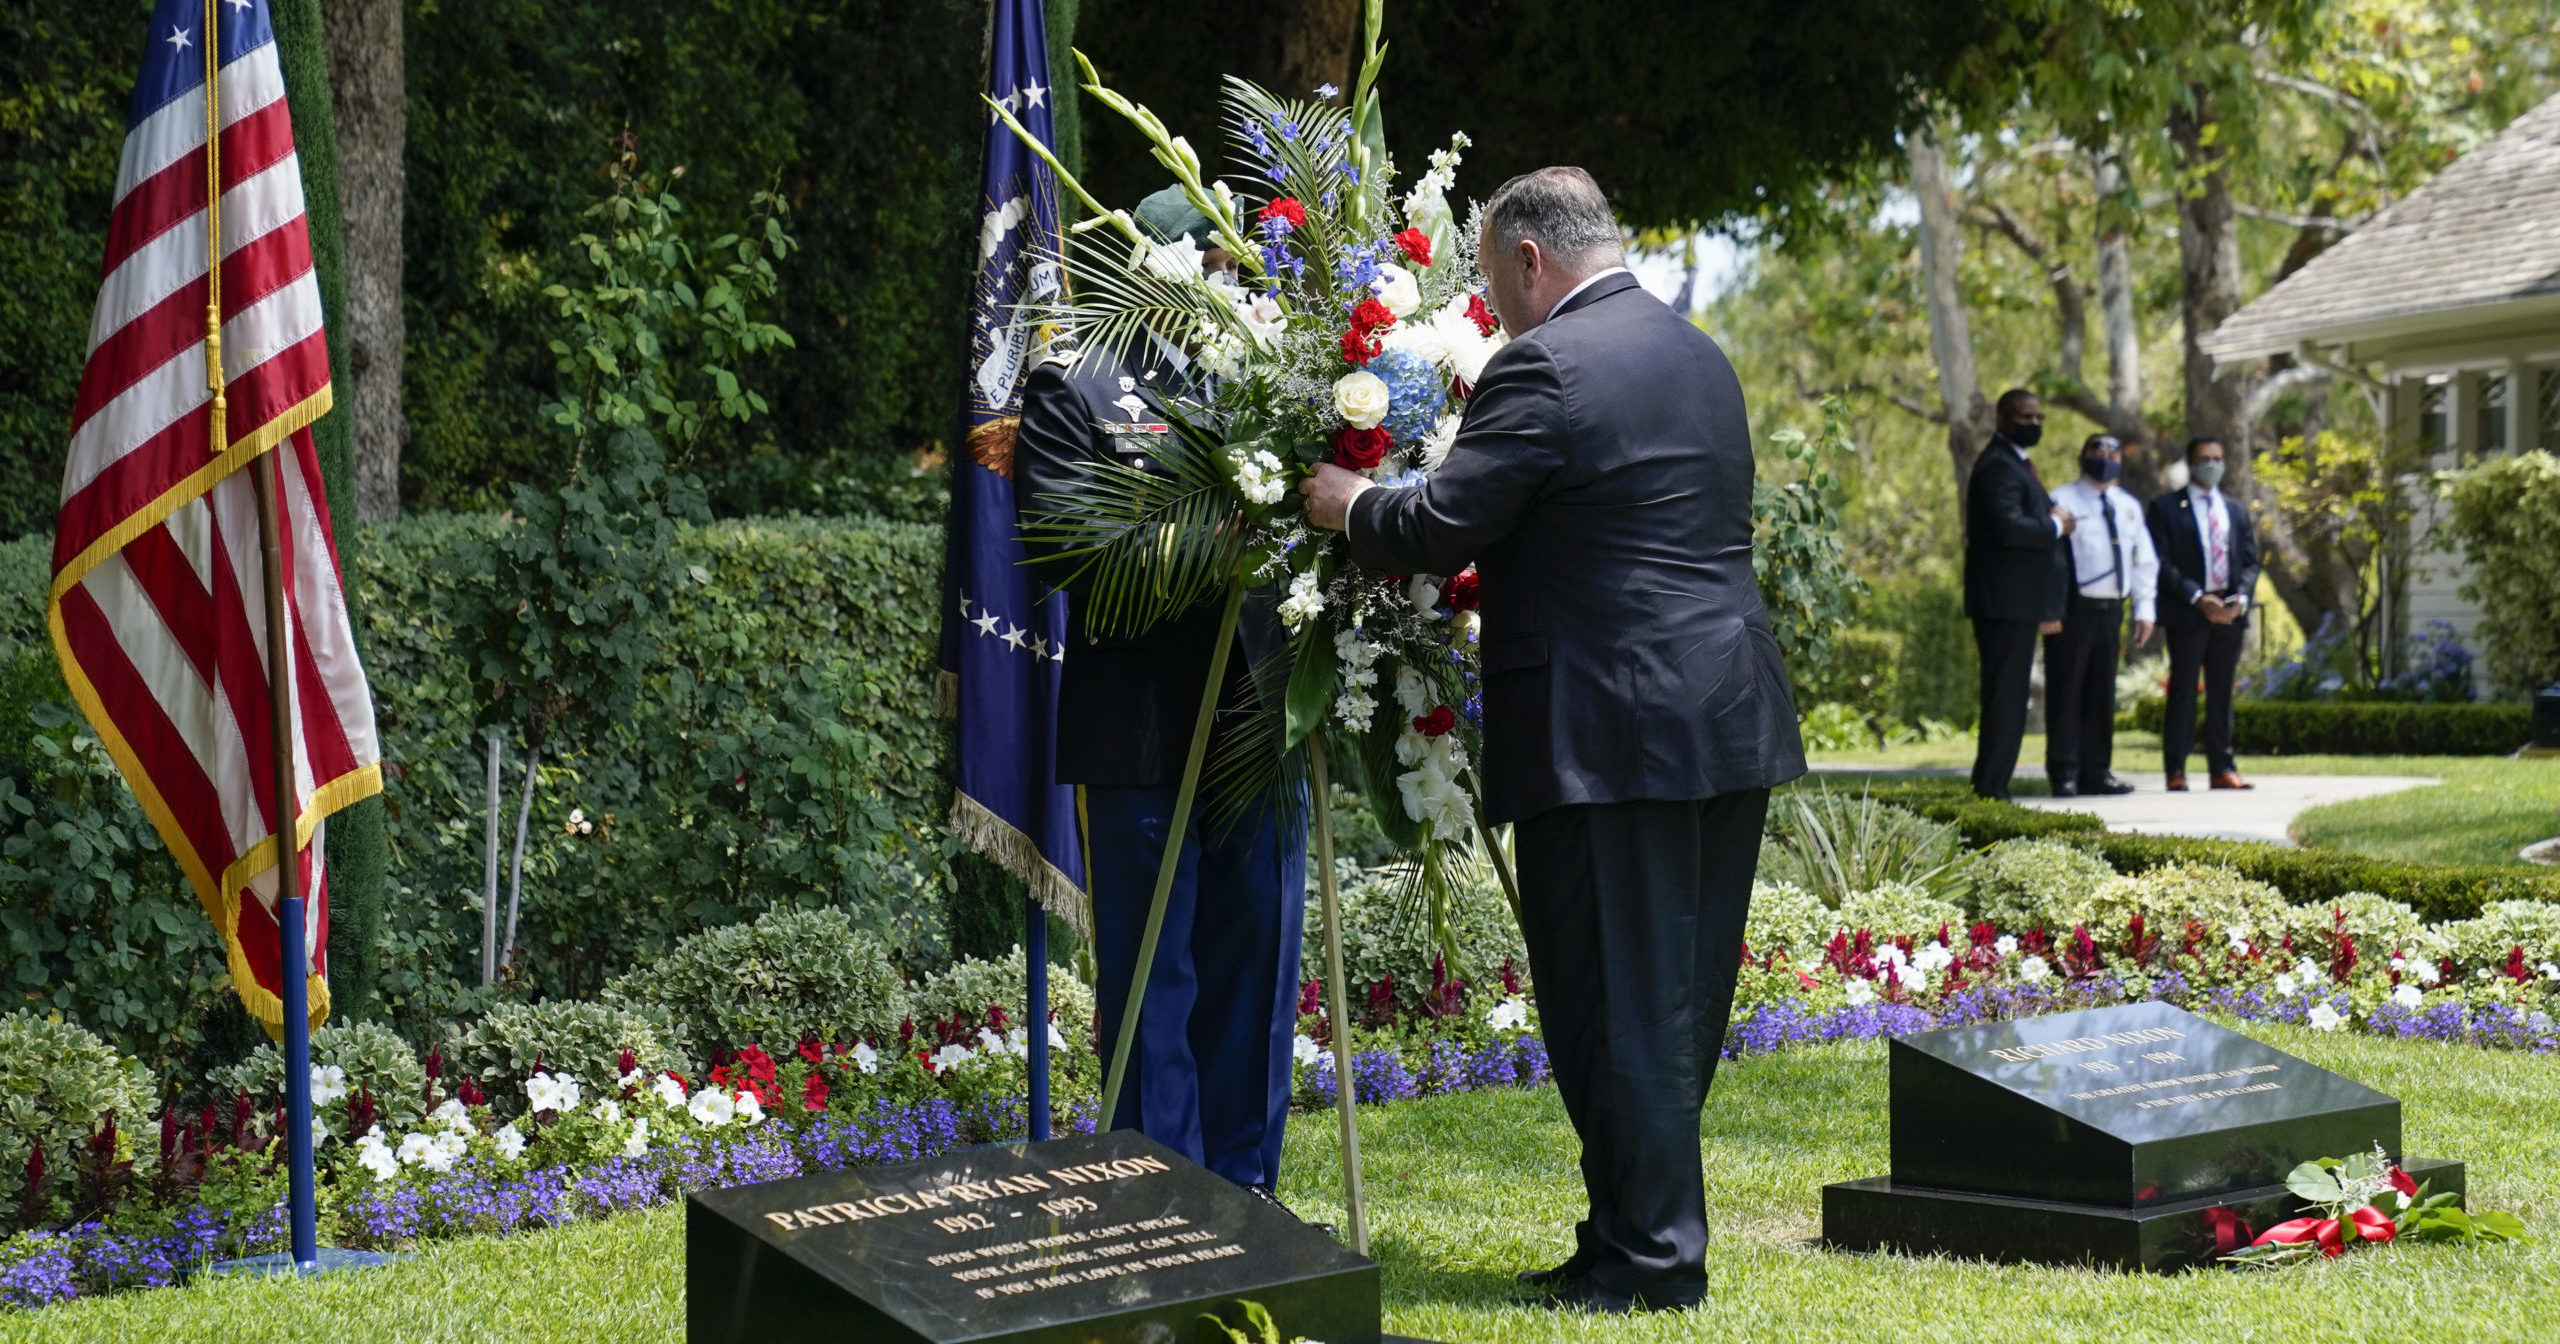 Secretary of State Mike Pompeo lays a wreath at the Richard Nixon Presidential Library on July 23, 2020, in Yorba Linda, California.